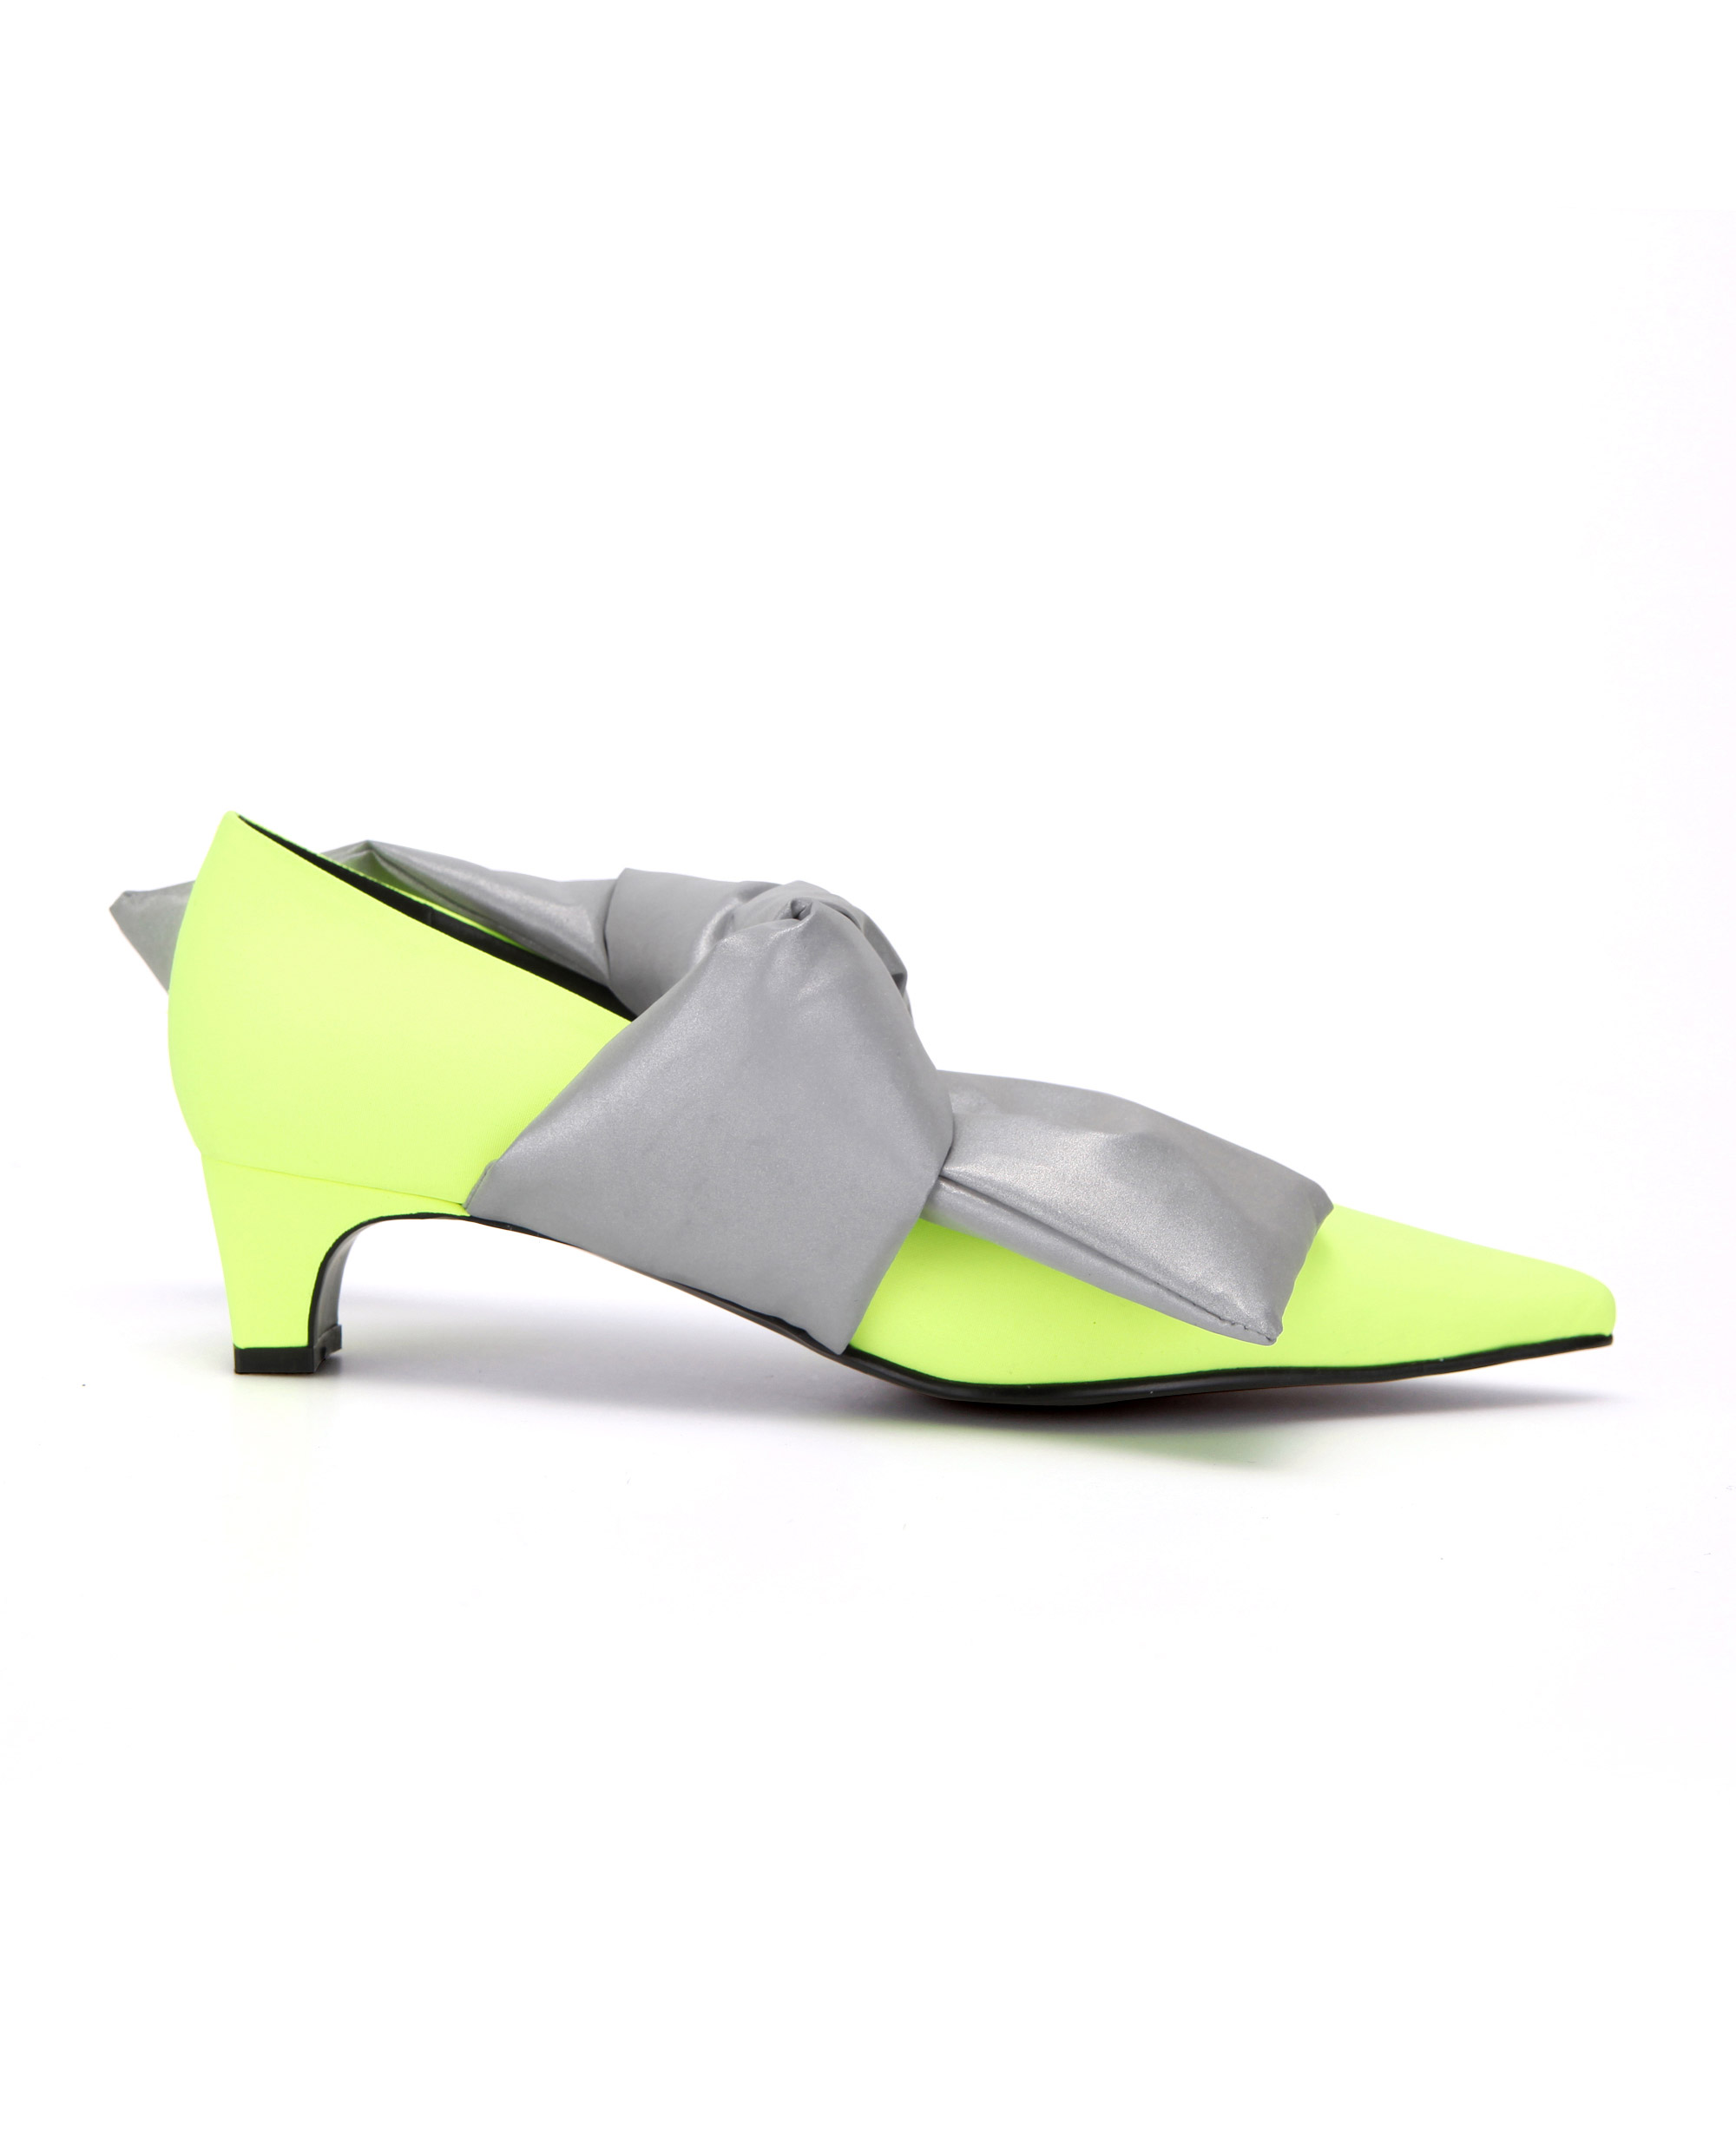 Extreme sharp toe pump with front ties | Fluorescent yellow